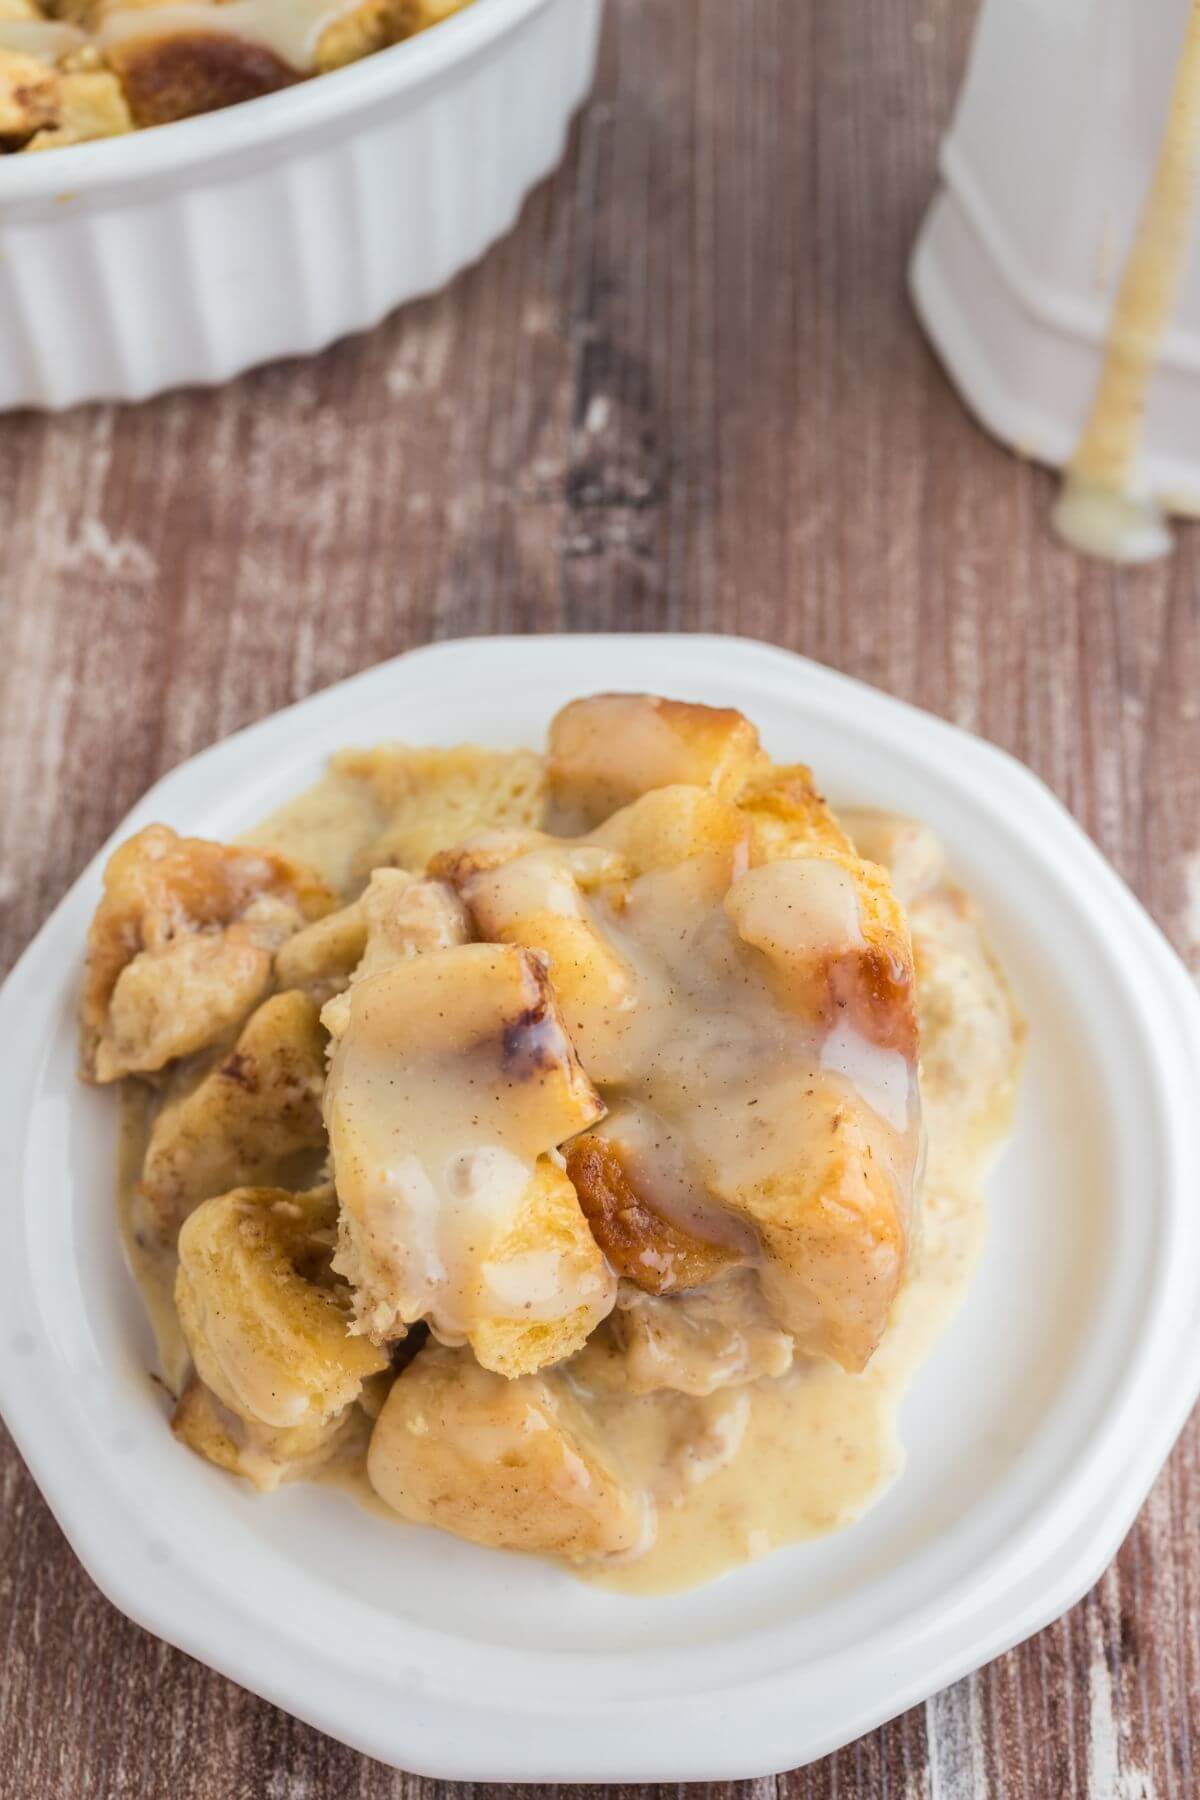 Translucent white glaze coats gooey cinnamon roll chunks in pudding served on a white plate.